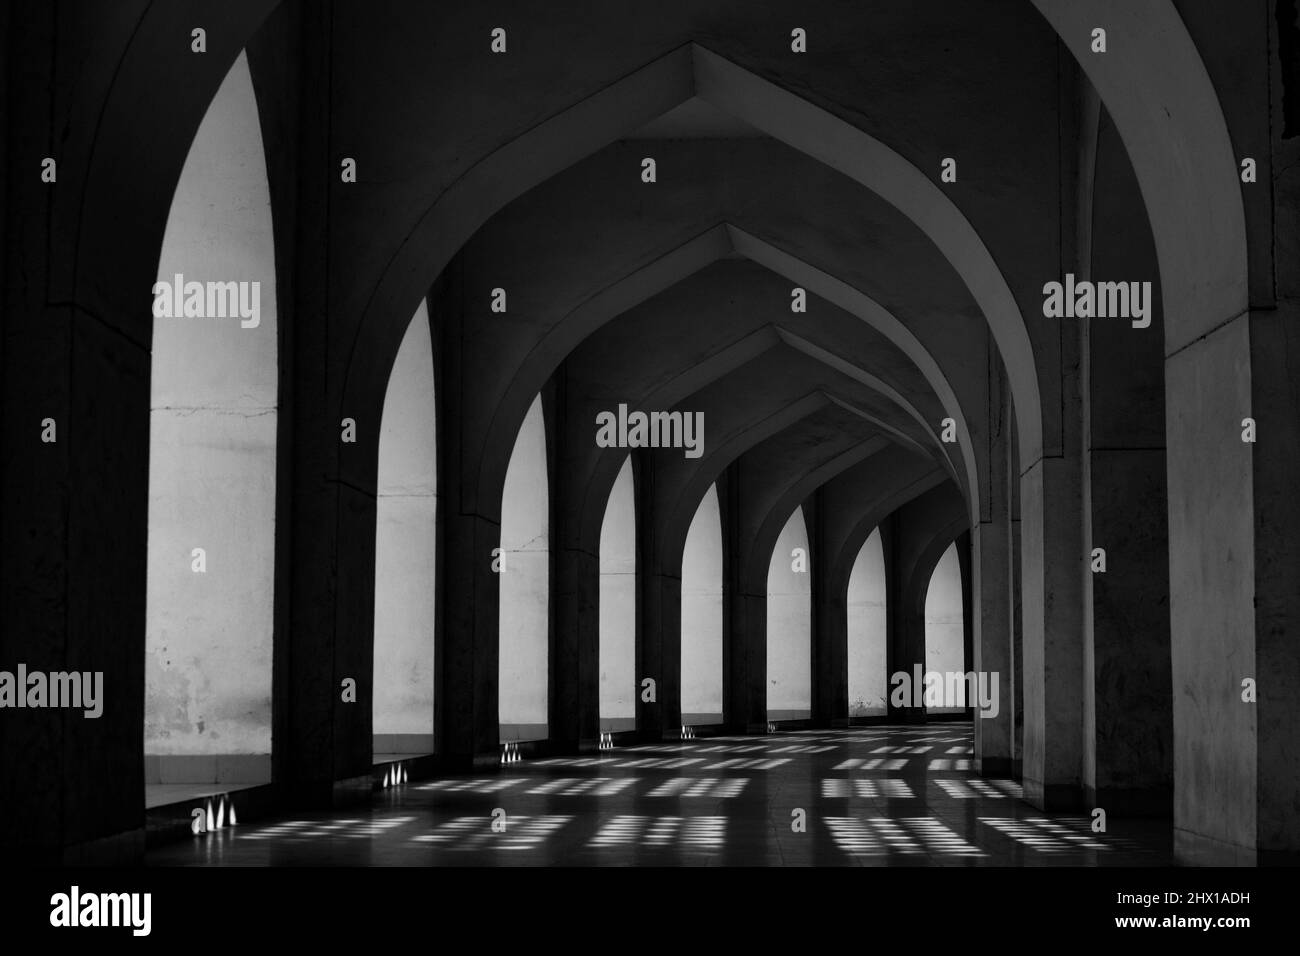 Mosque architecture of bangladesh Black and White Stock Photos & Images ...